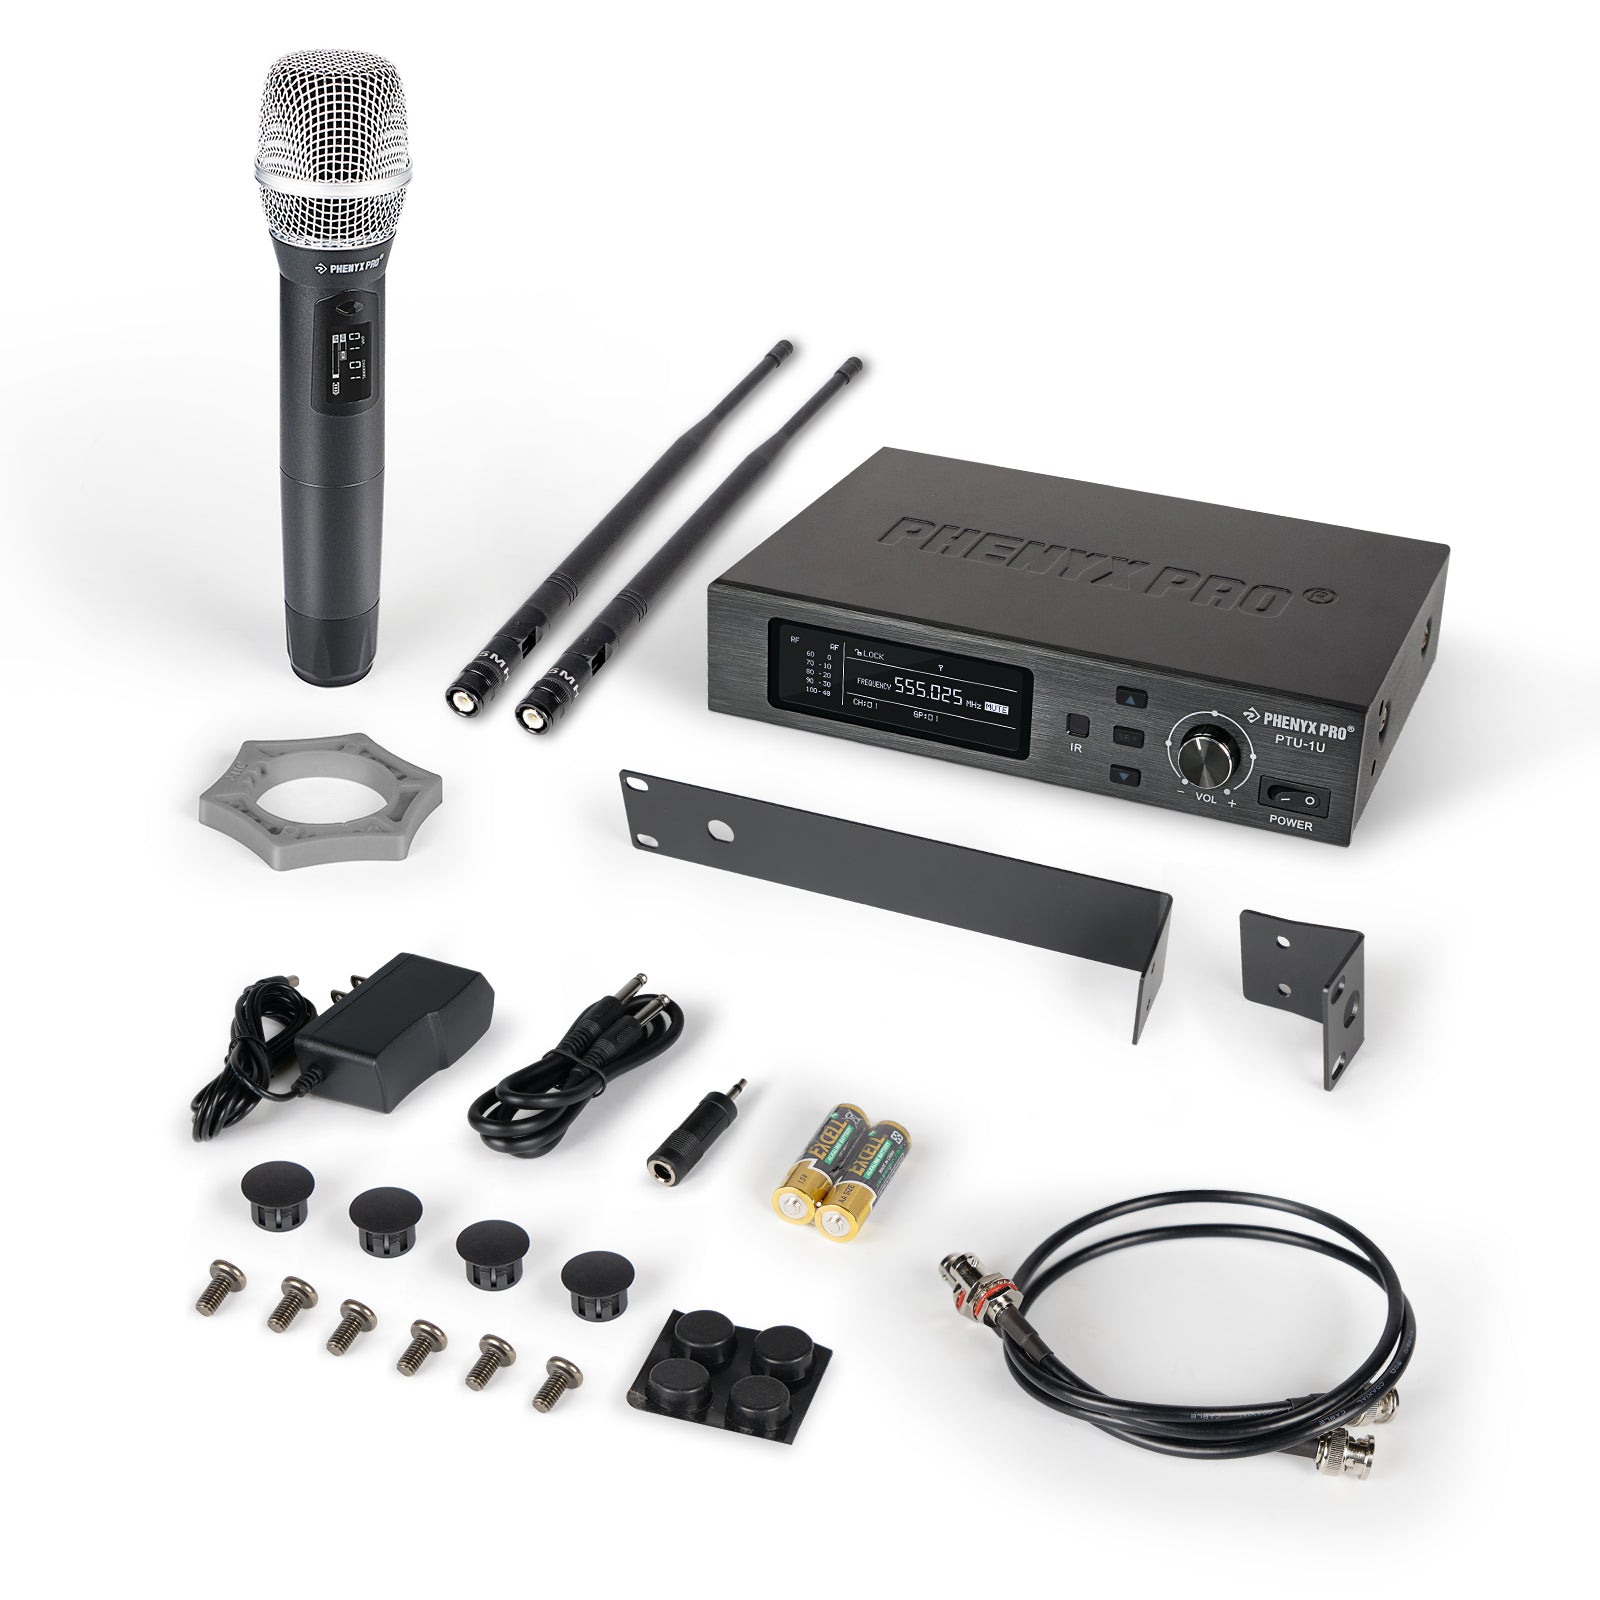 Phenyx Pro PTU-1U Comes with rack mount kit with antenna extension cables to facilitate more professional use